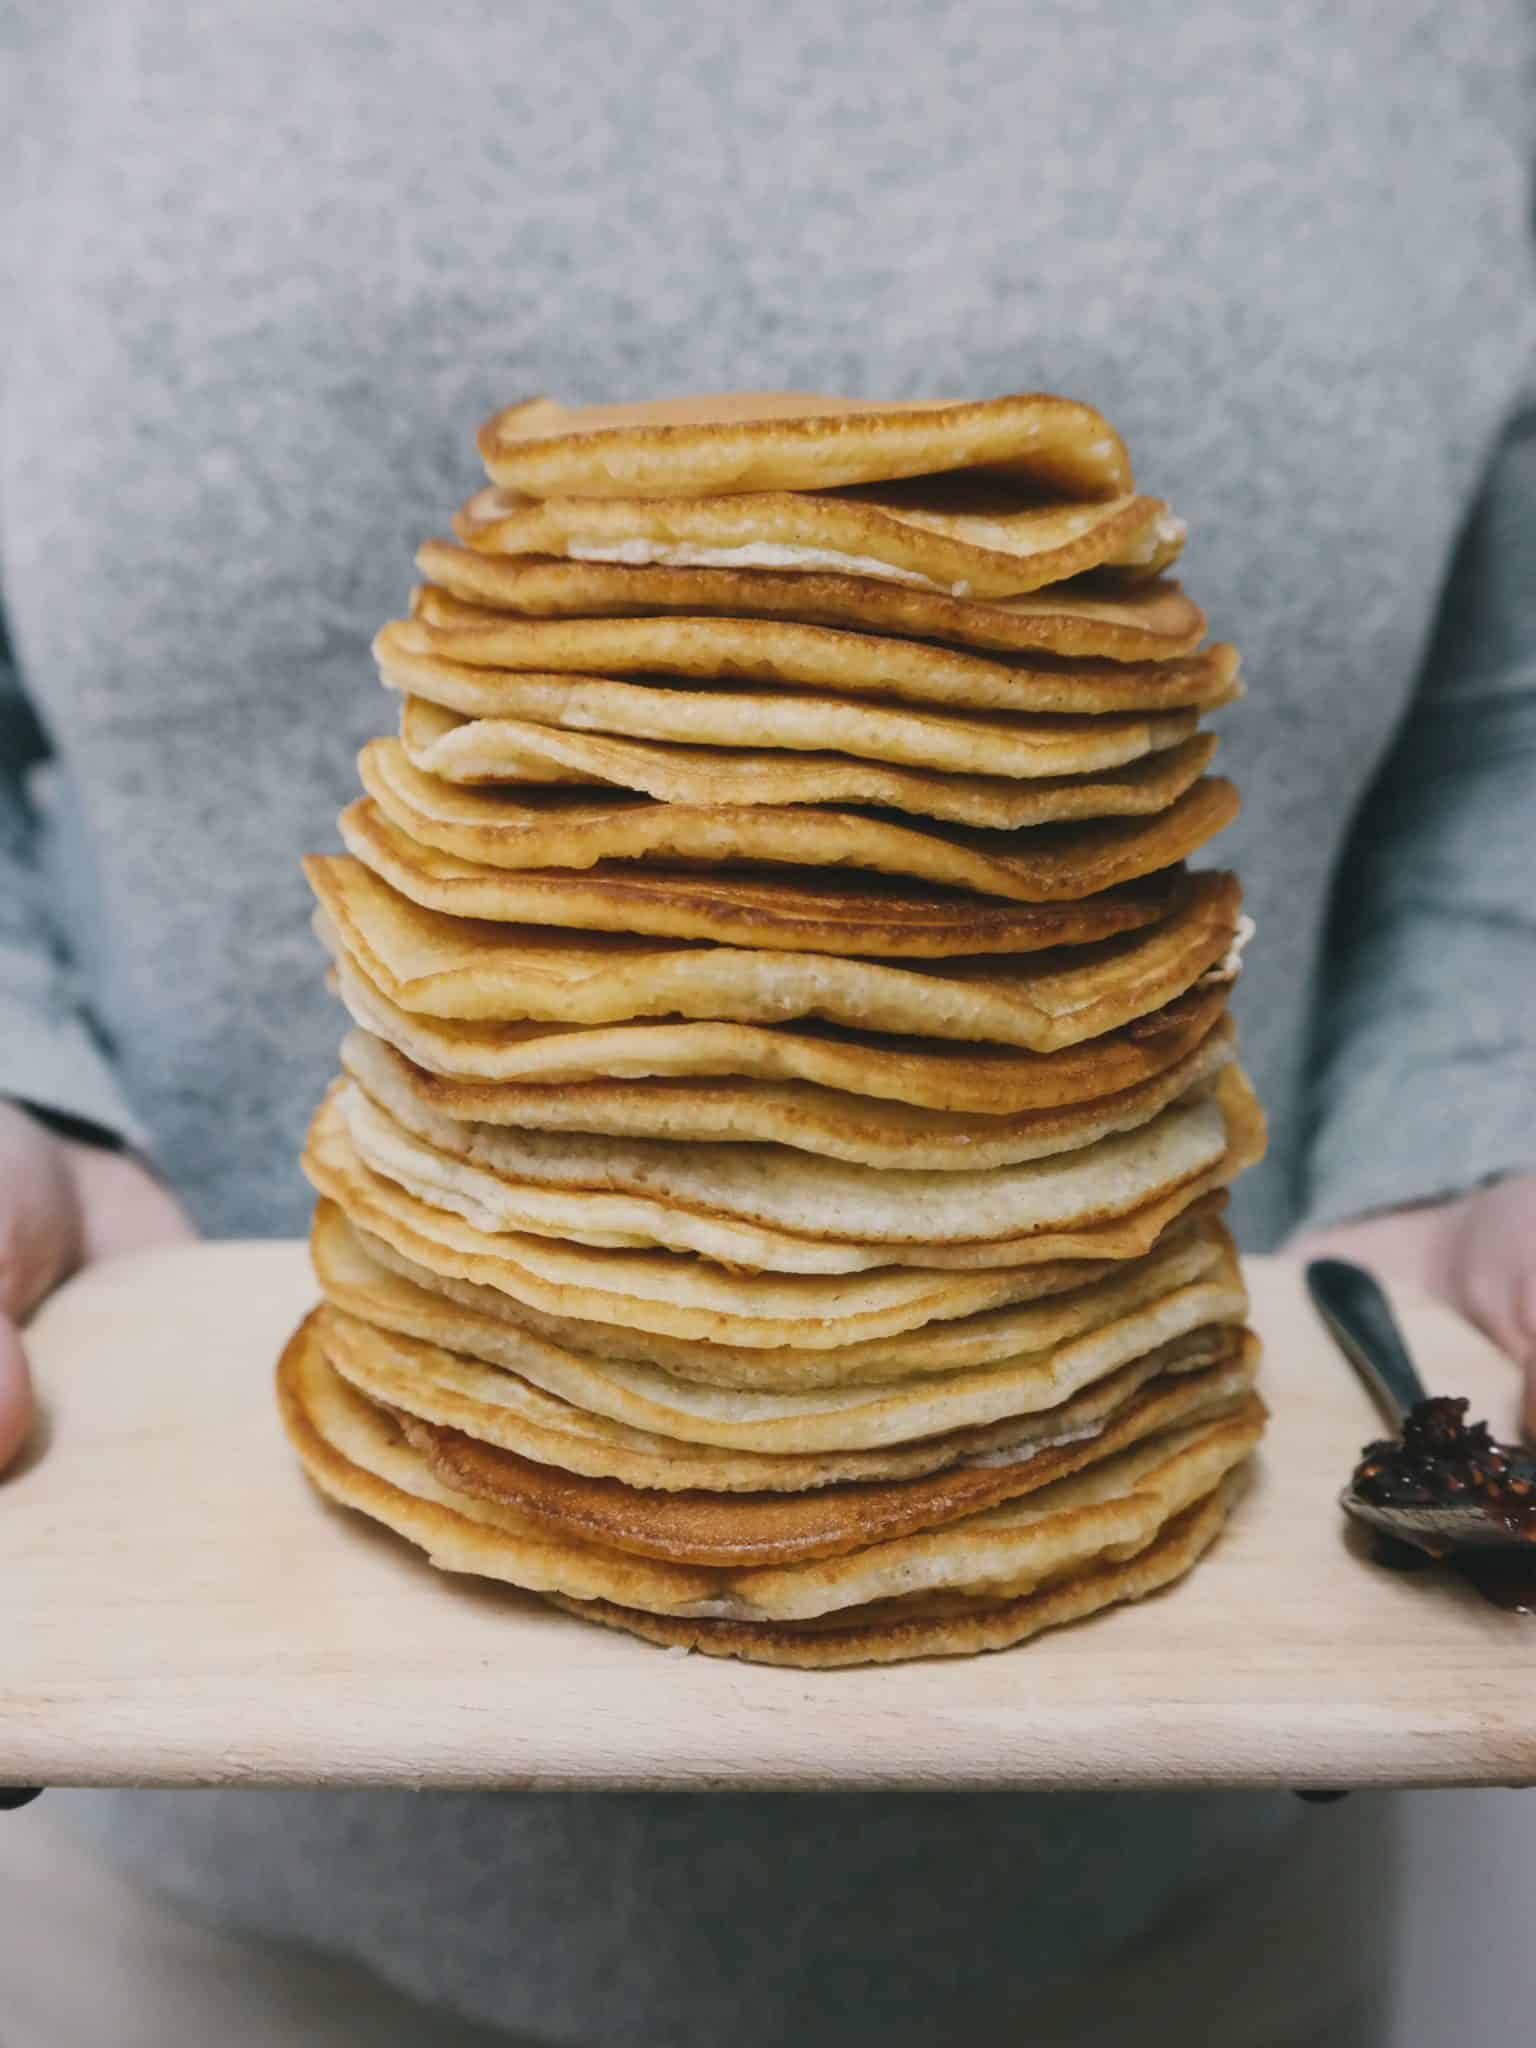 What Pancake Syrup is Keto Friendly?